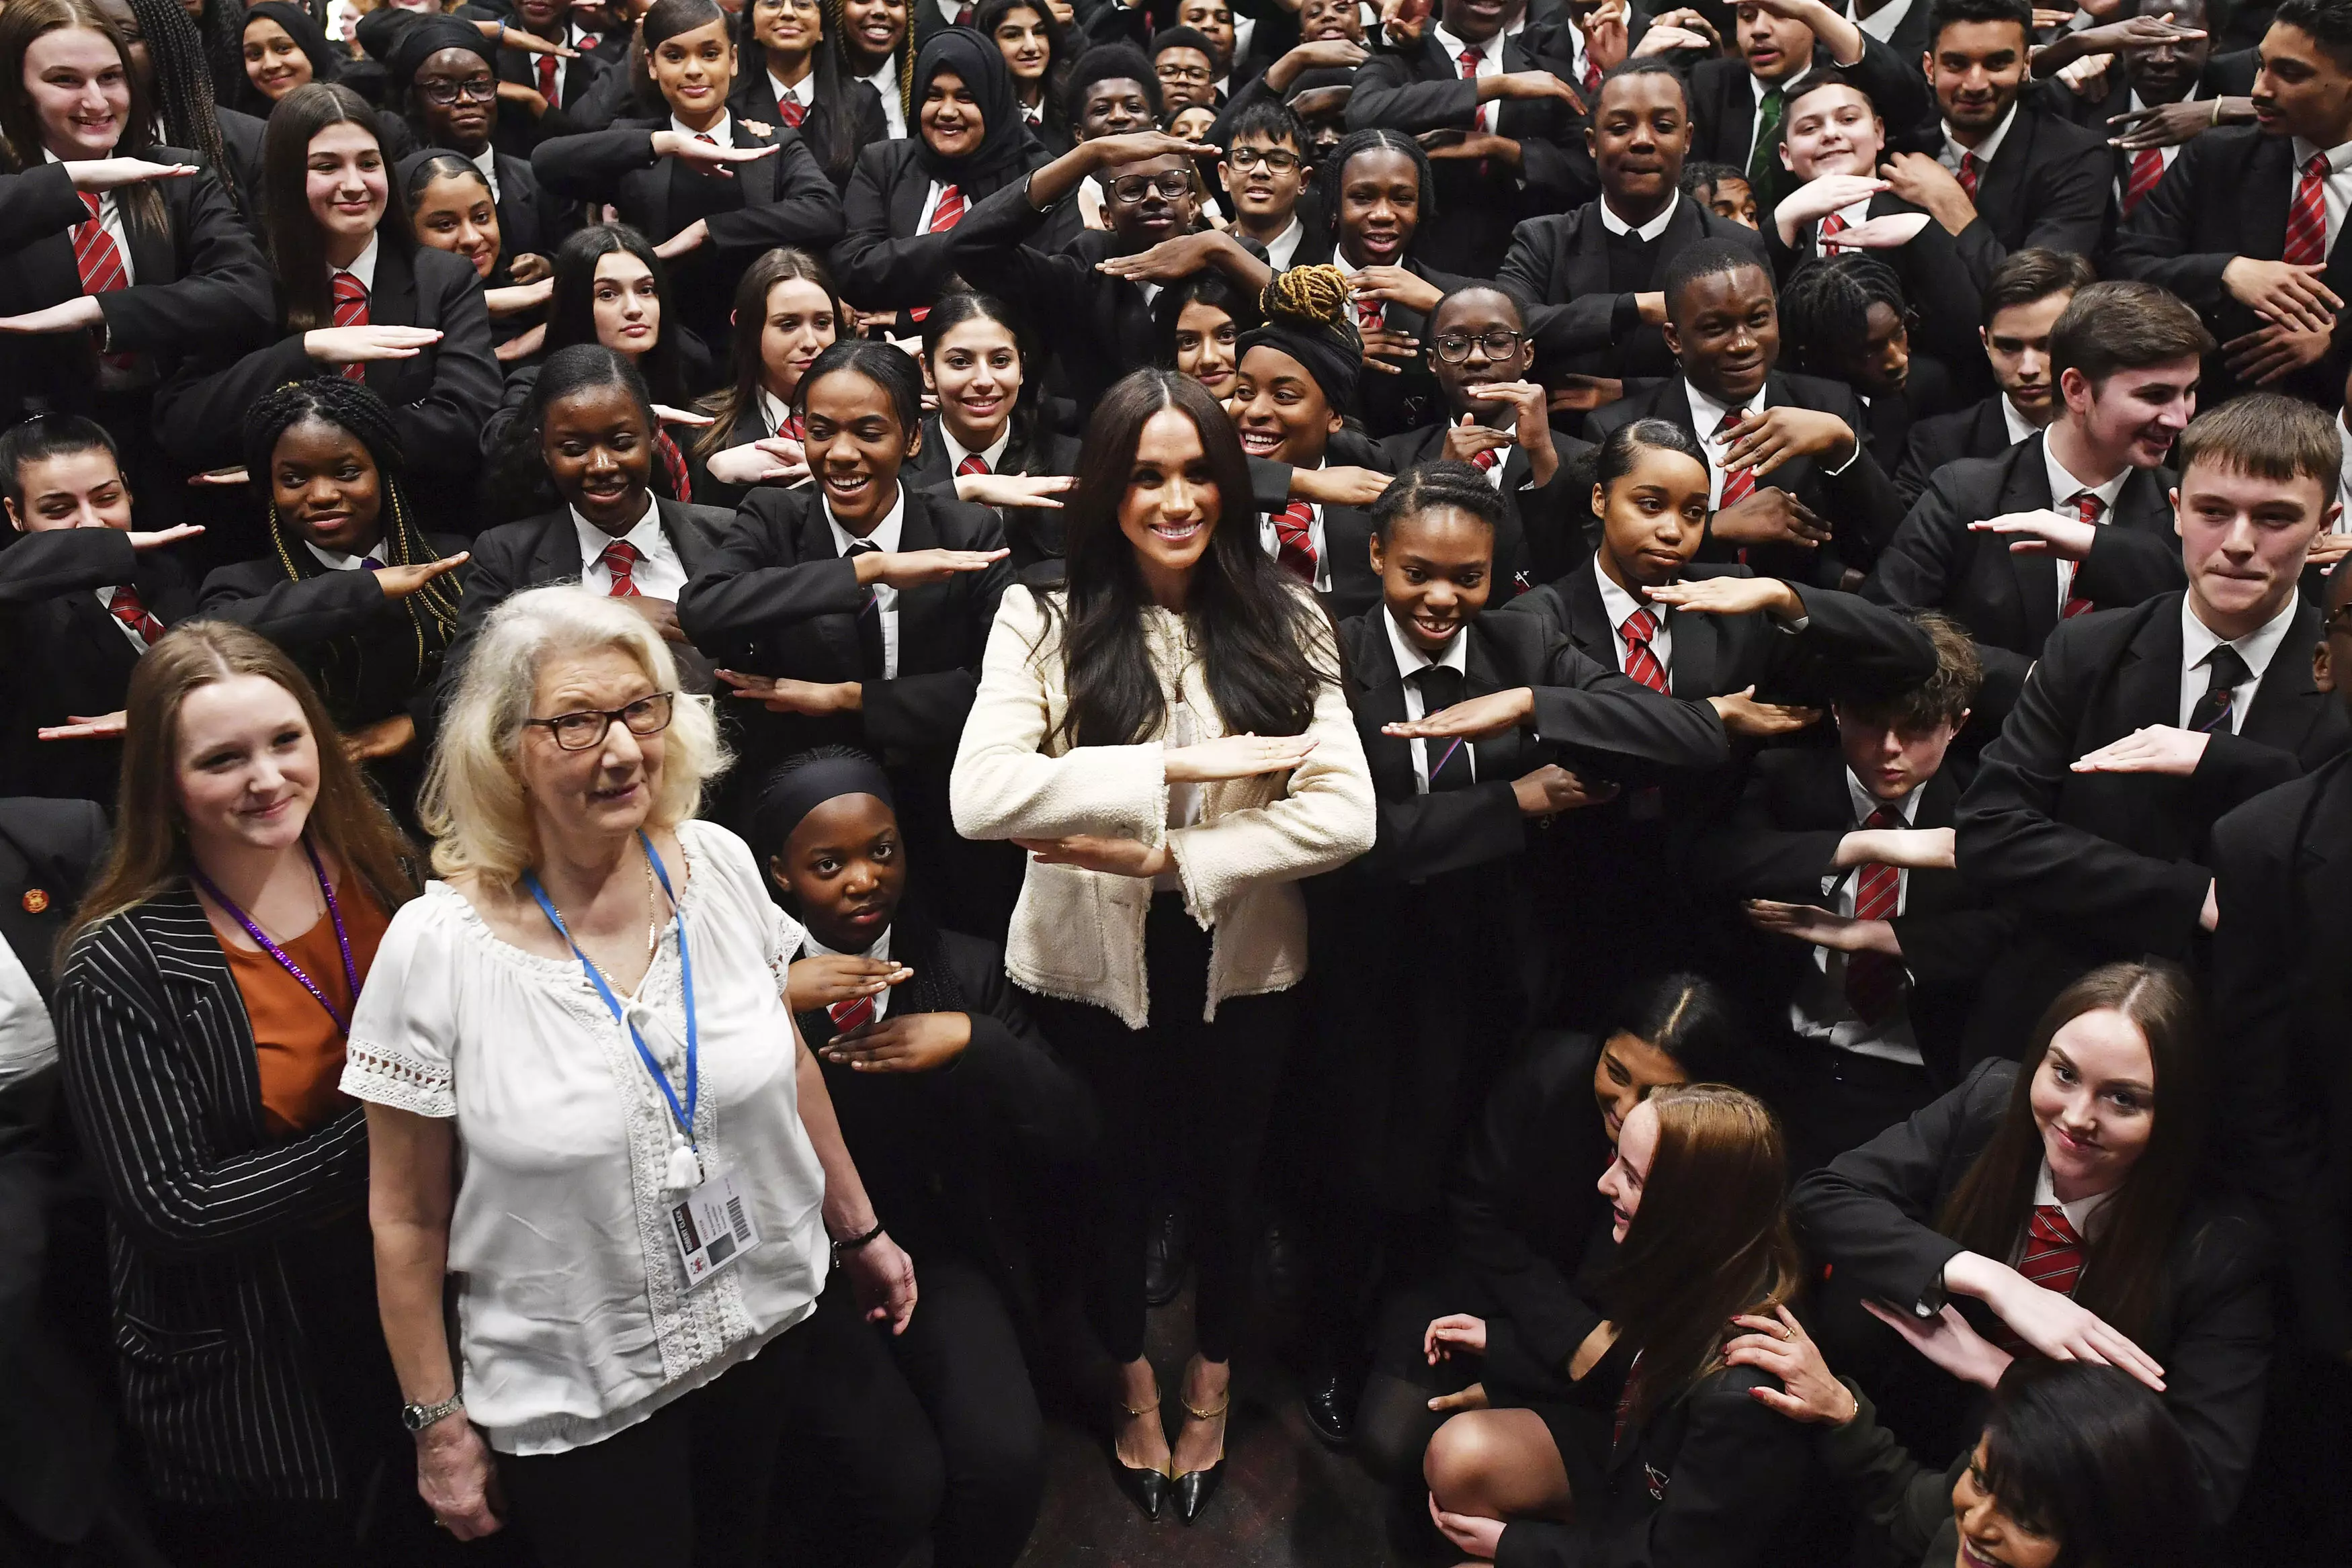 Meghan posing with school children making the equality sign.